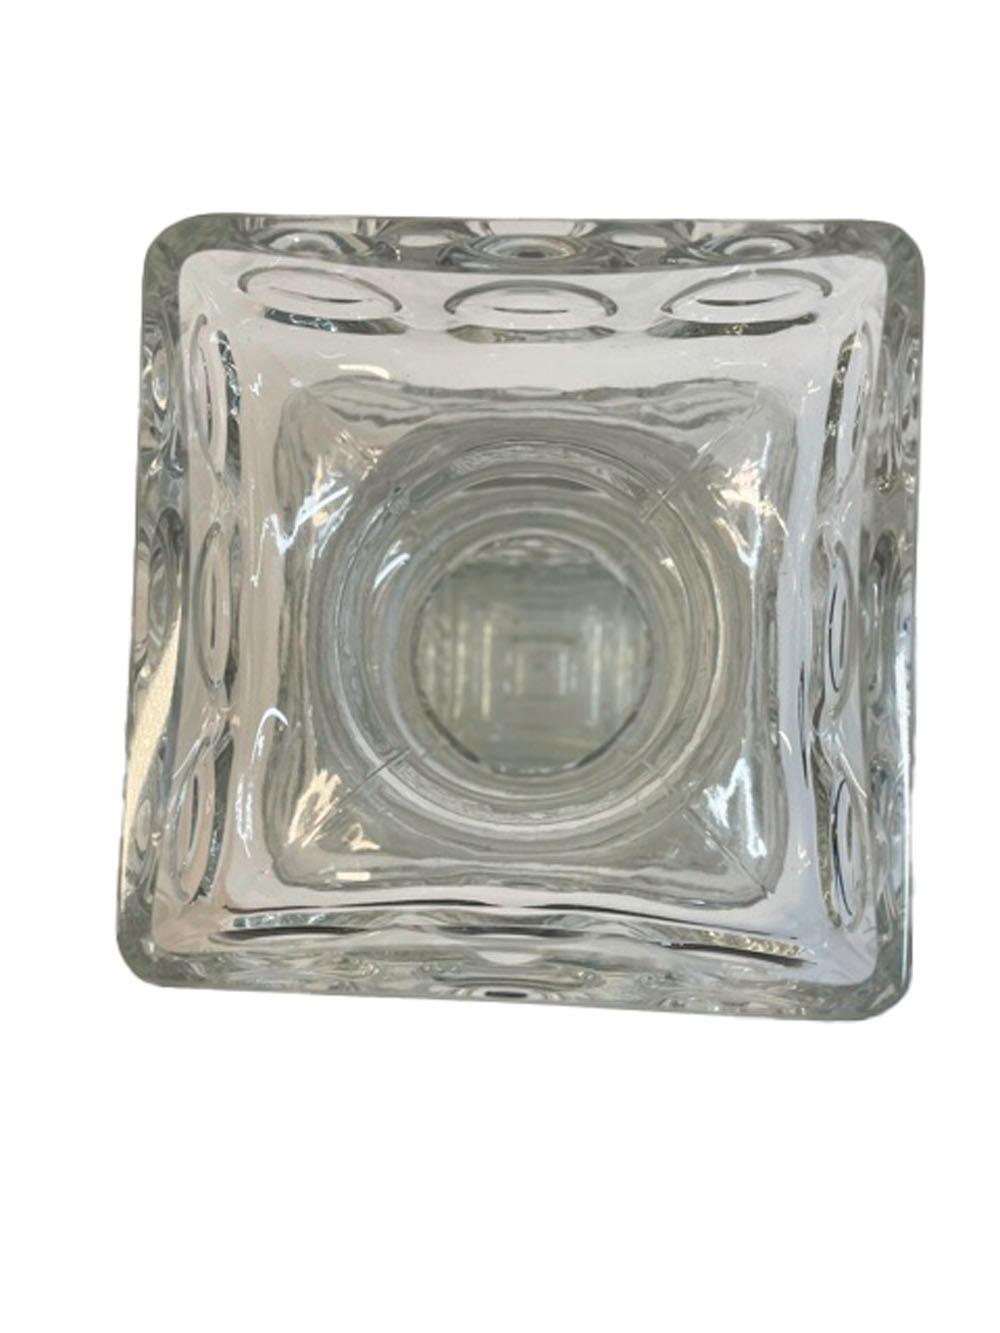 Mid-Century Modern Riihimaki clear glass vase of square form with textured surface, the top molded with 2 waisted bands separating a squared collar and rim each molded with 3 raised rings to each side.